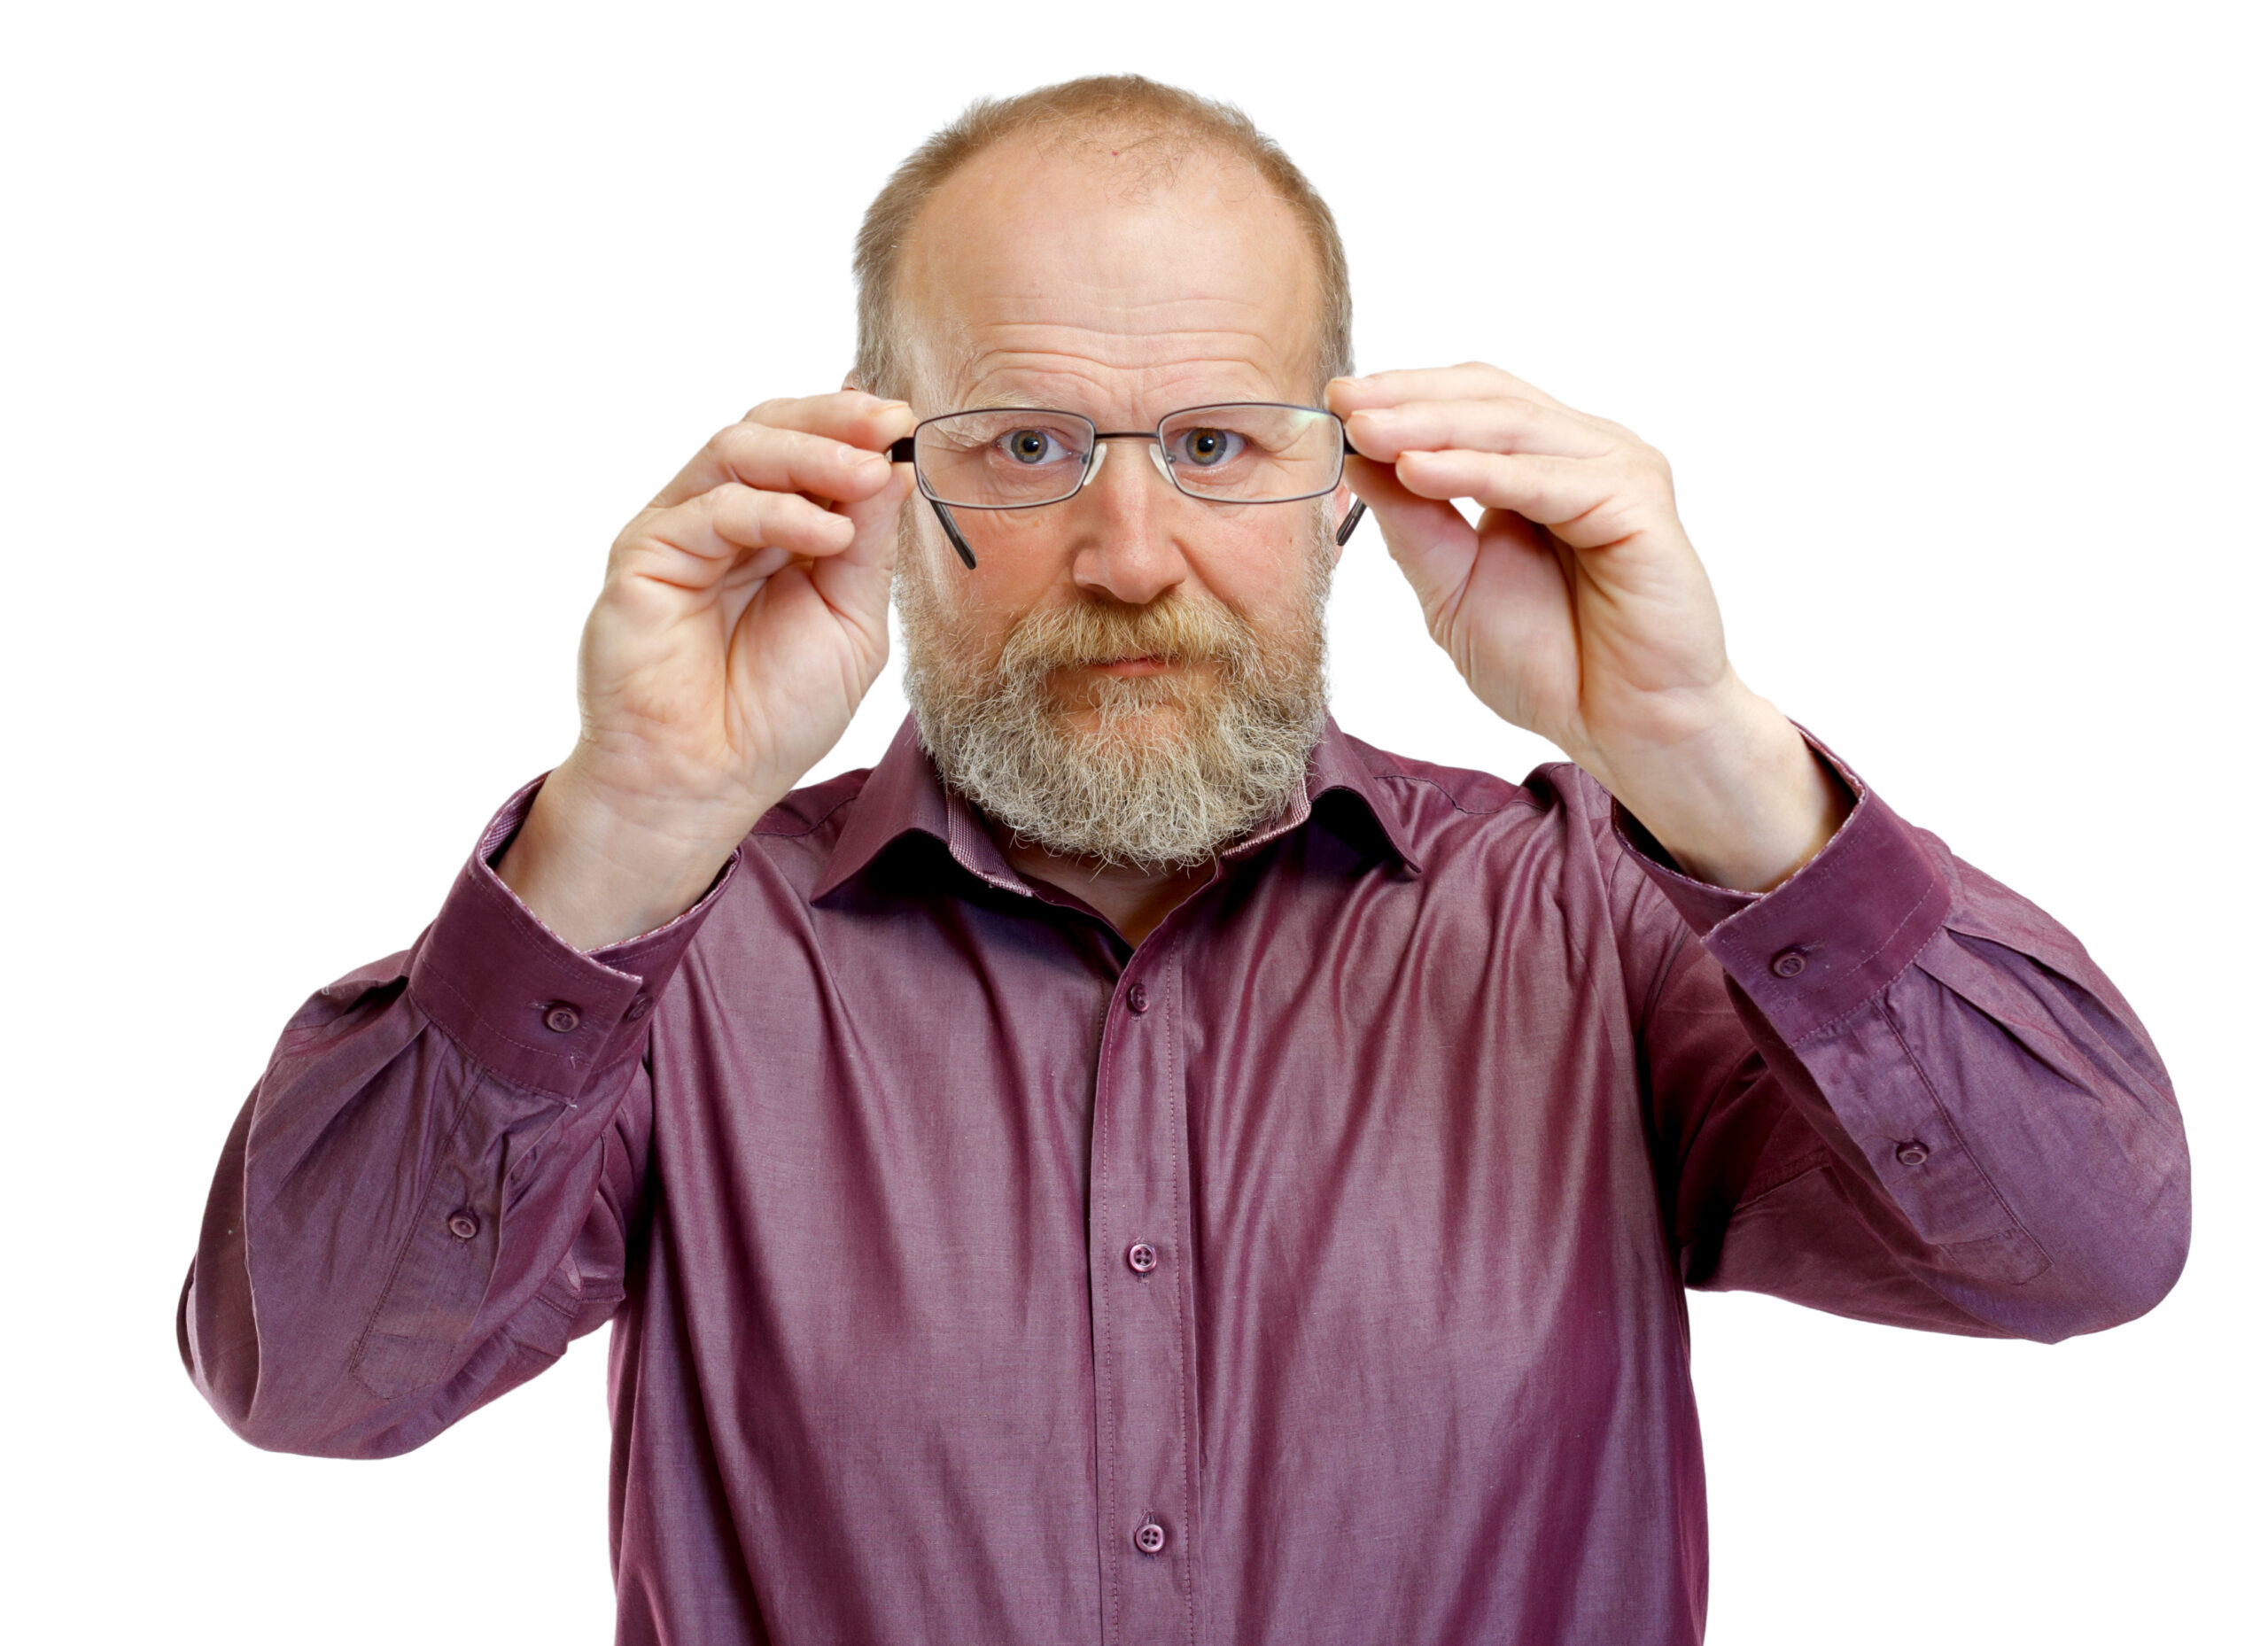 What are the problems with bifocals?